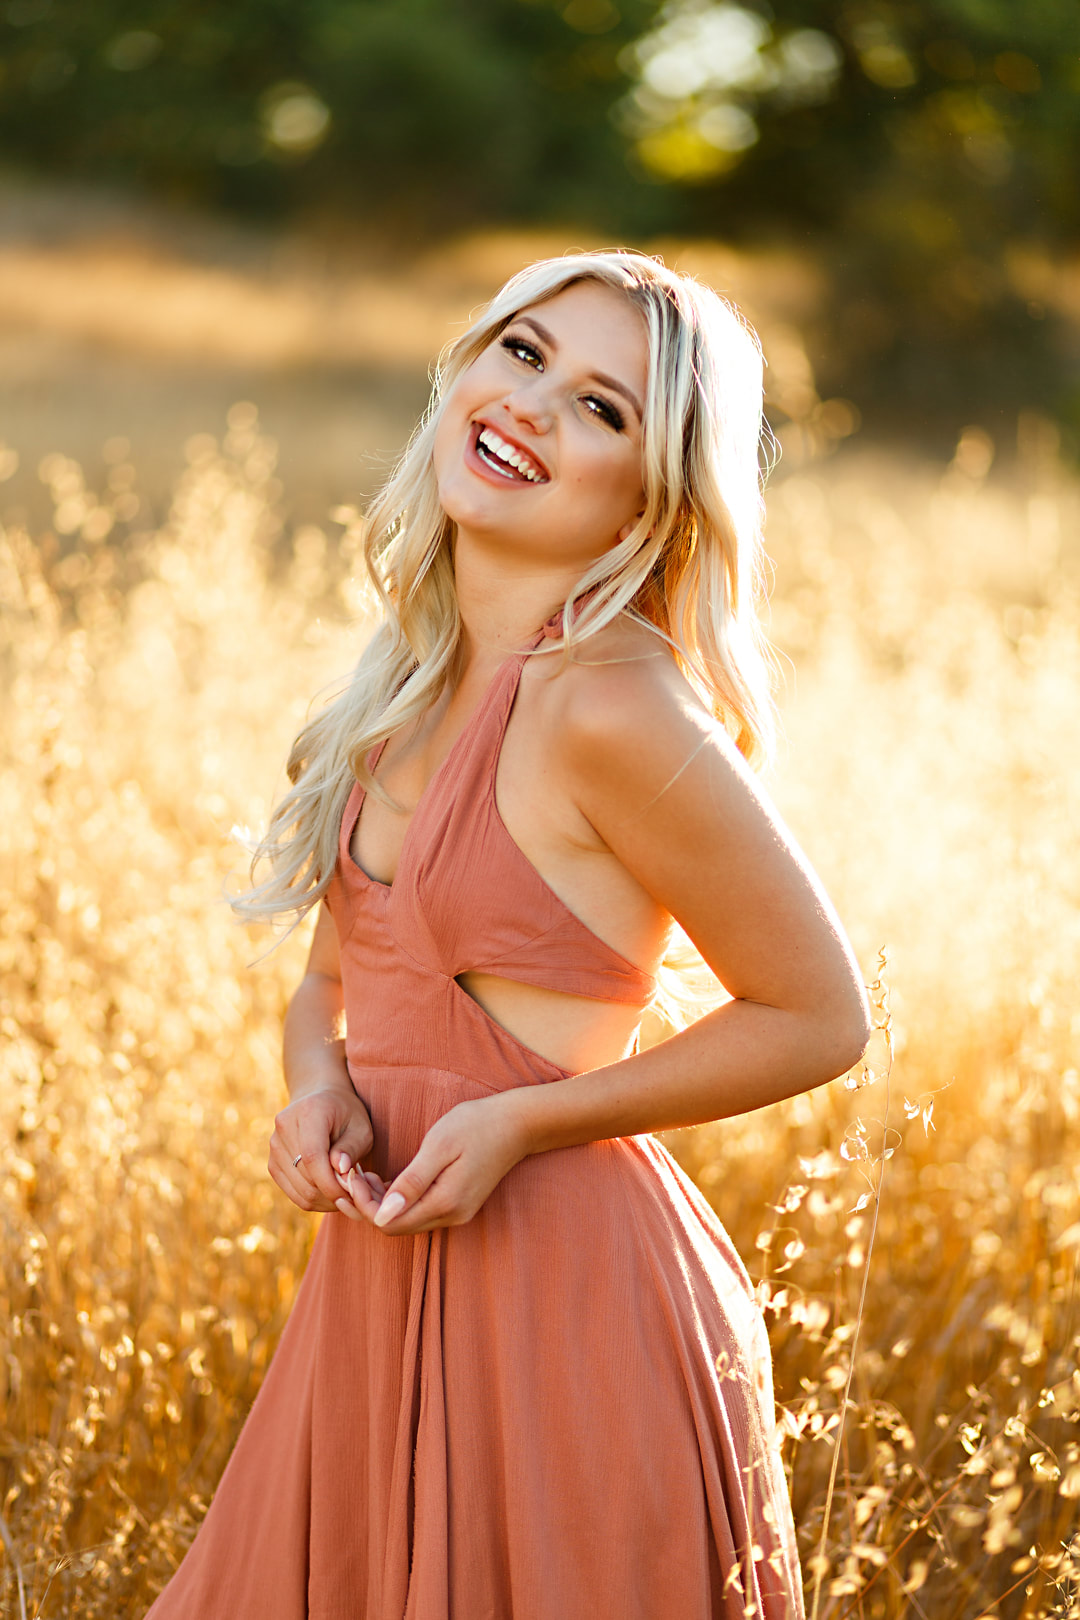 Laughing during your senior pictures is one of the best ways to look authentic!